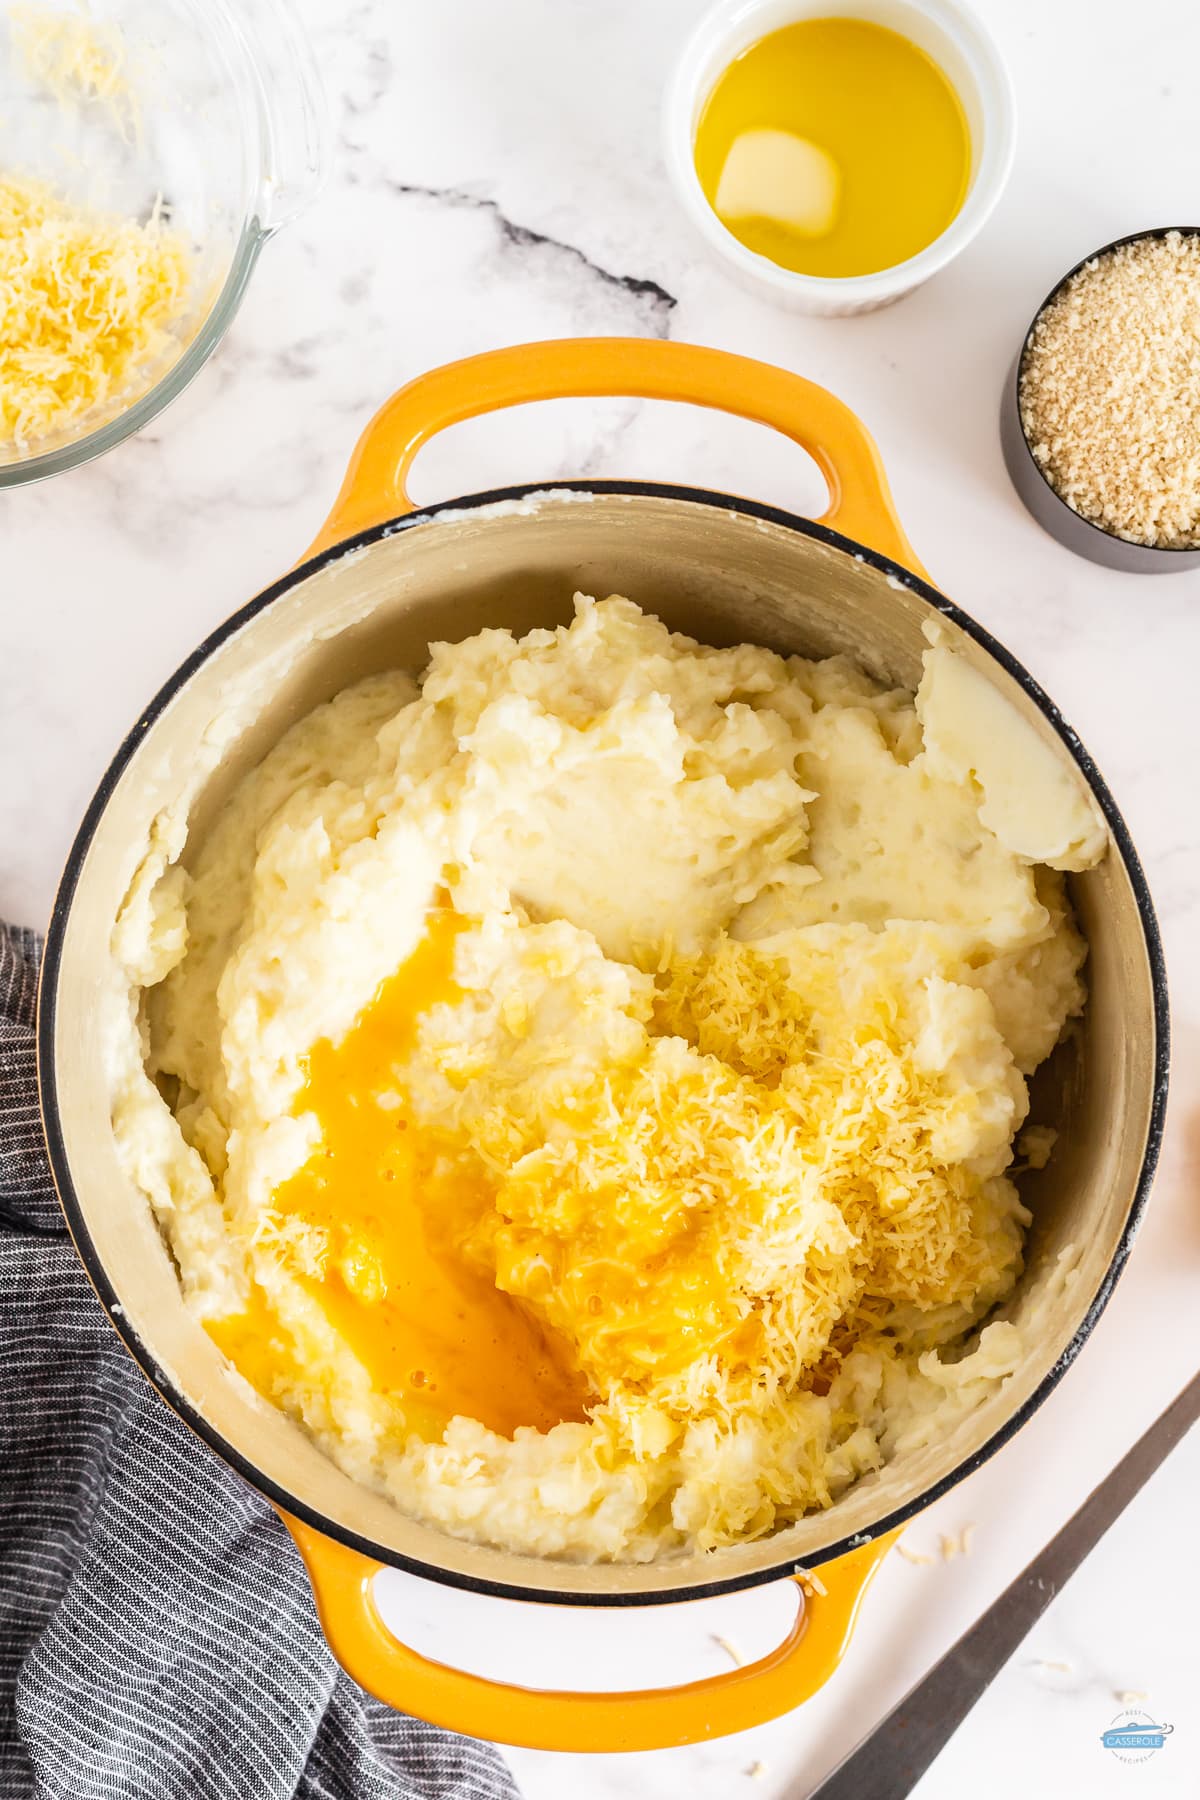 mashed potatoes in a yellow pot with shredded cheese